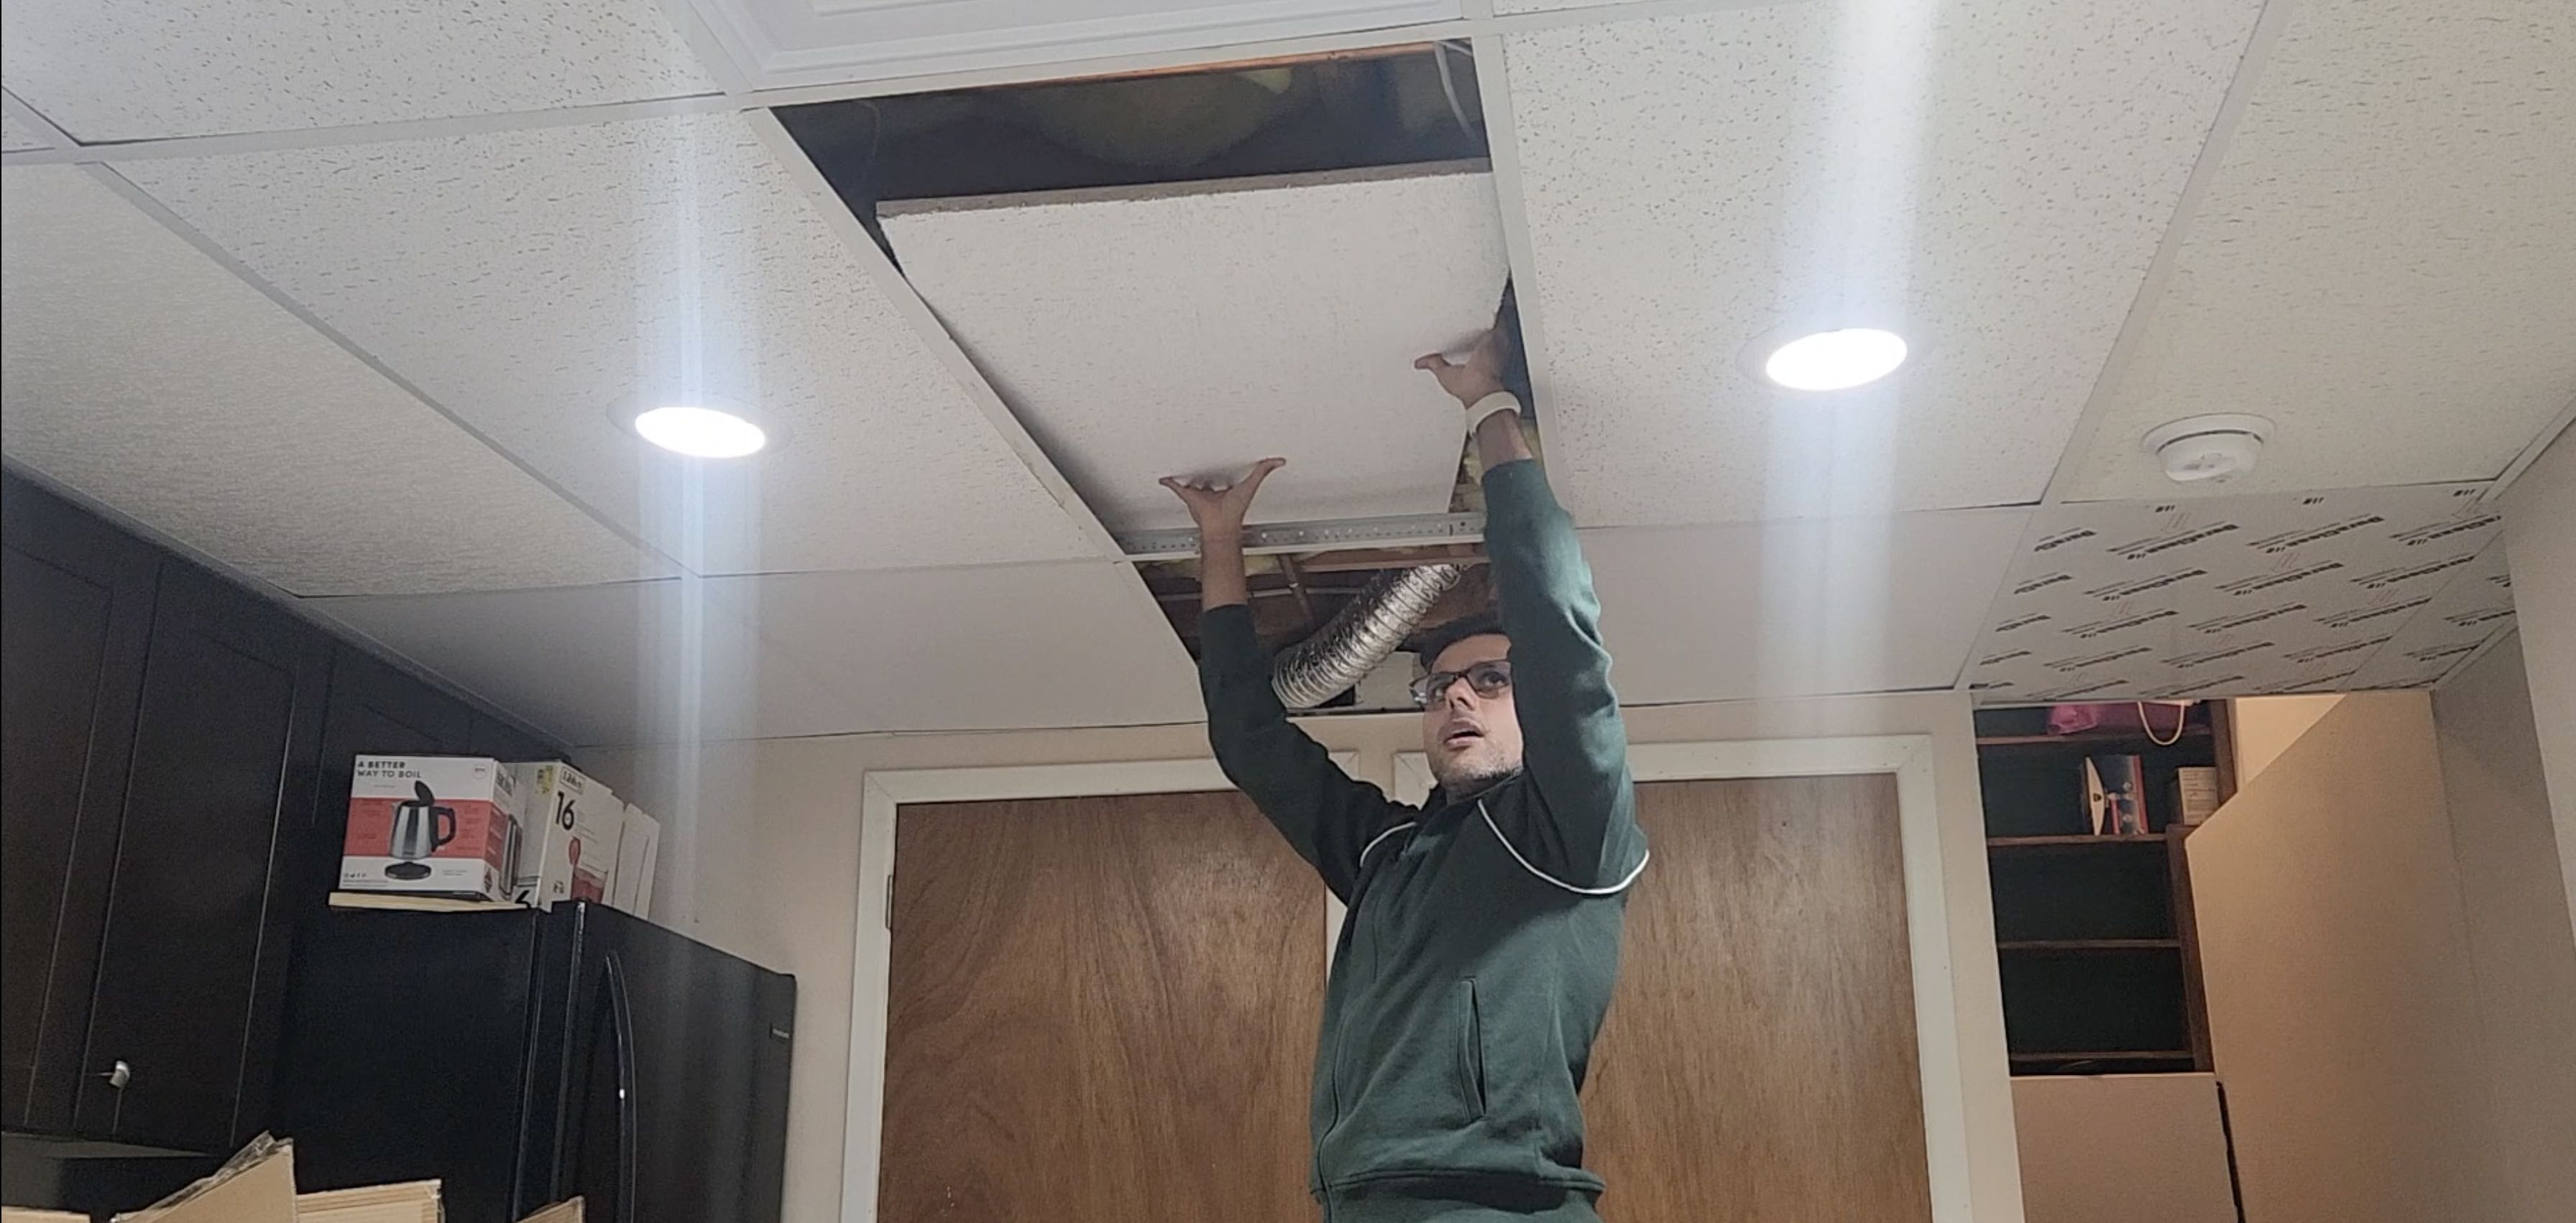 Removing a ceiling tile